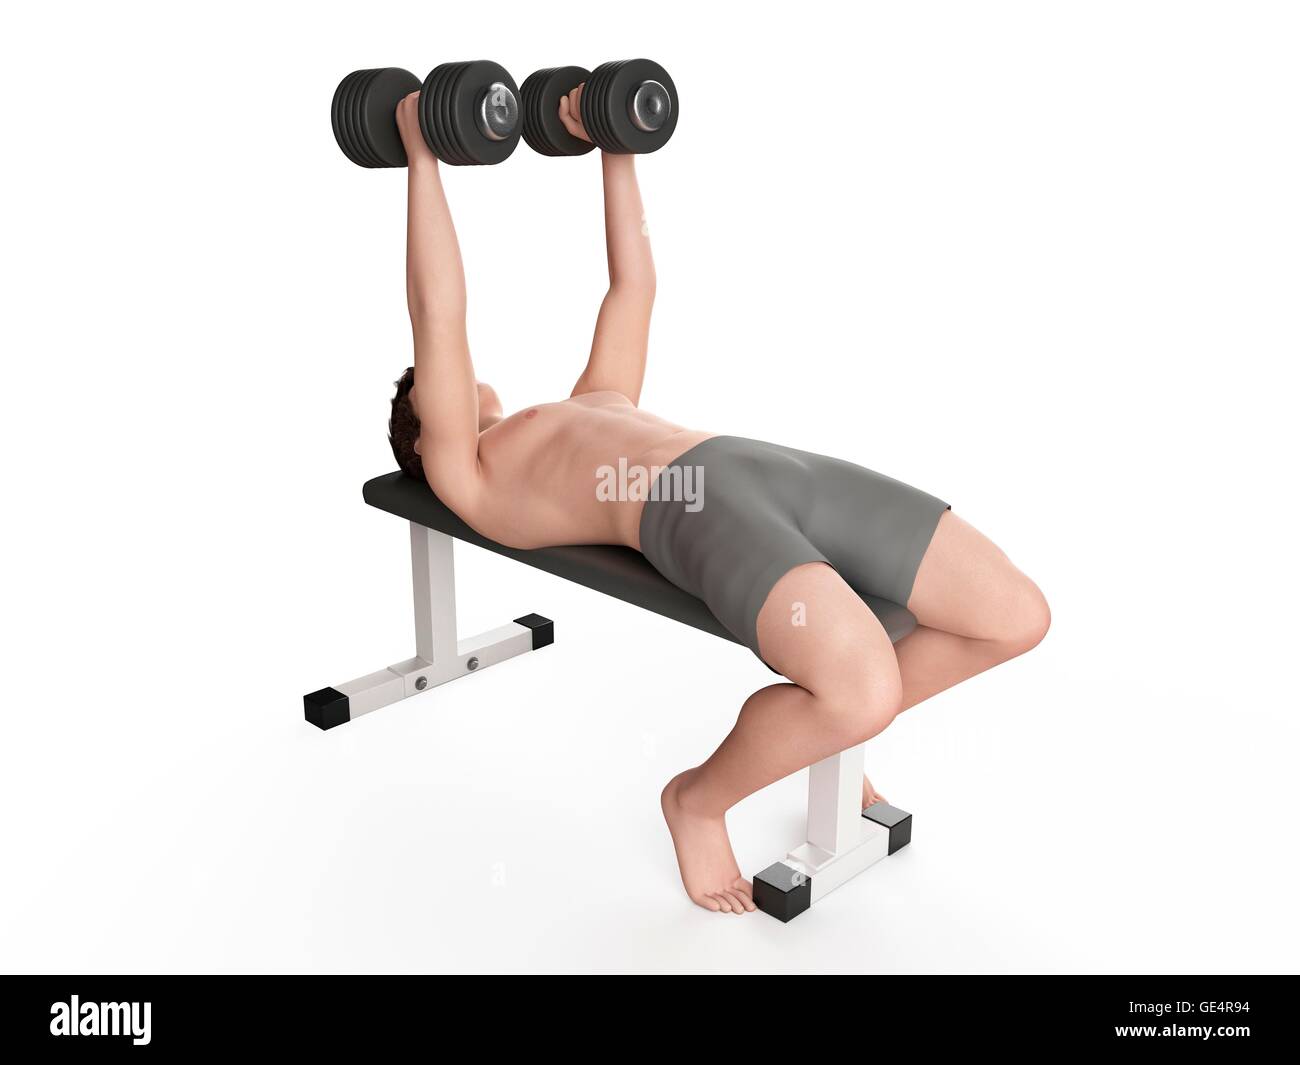 Dumbbell Fly High Resolution Stock Photography and Images - Alamy